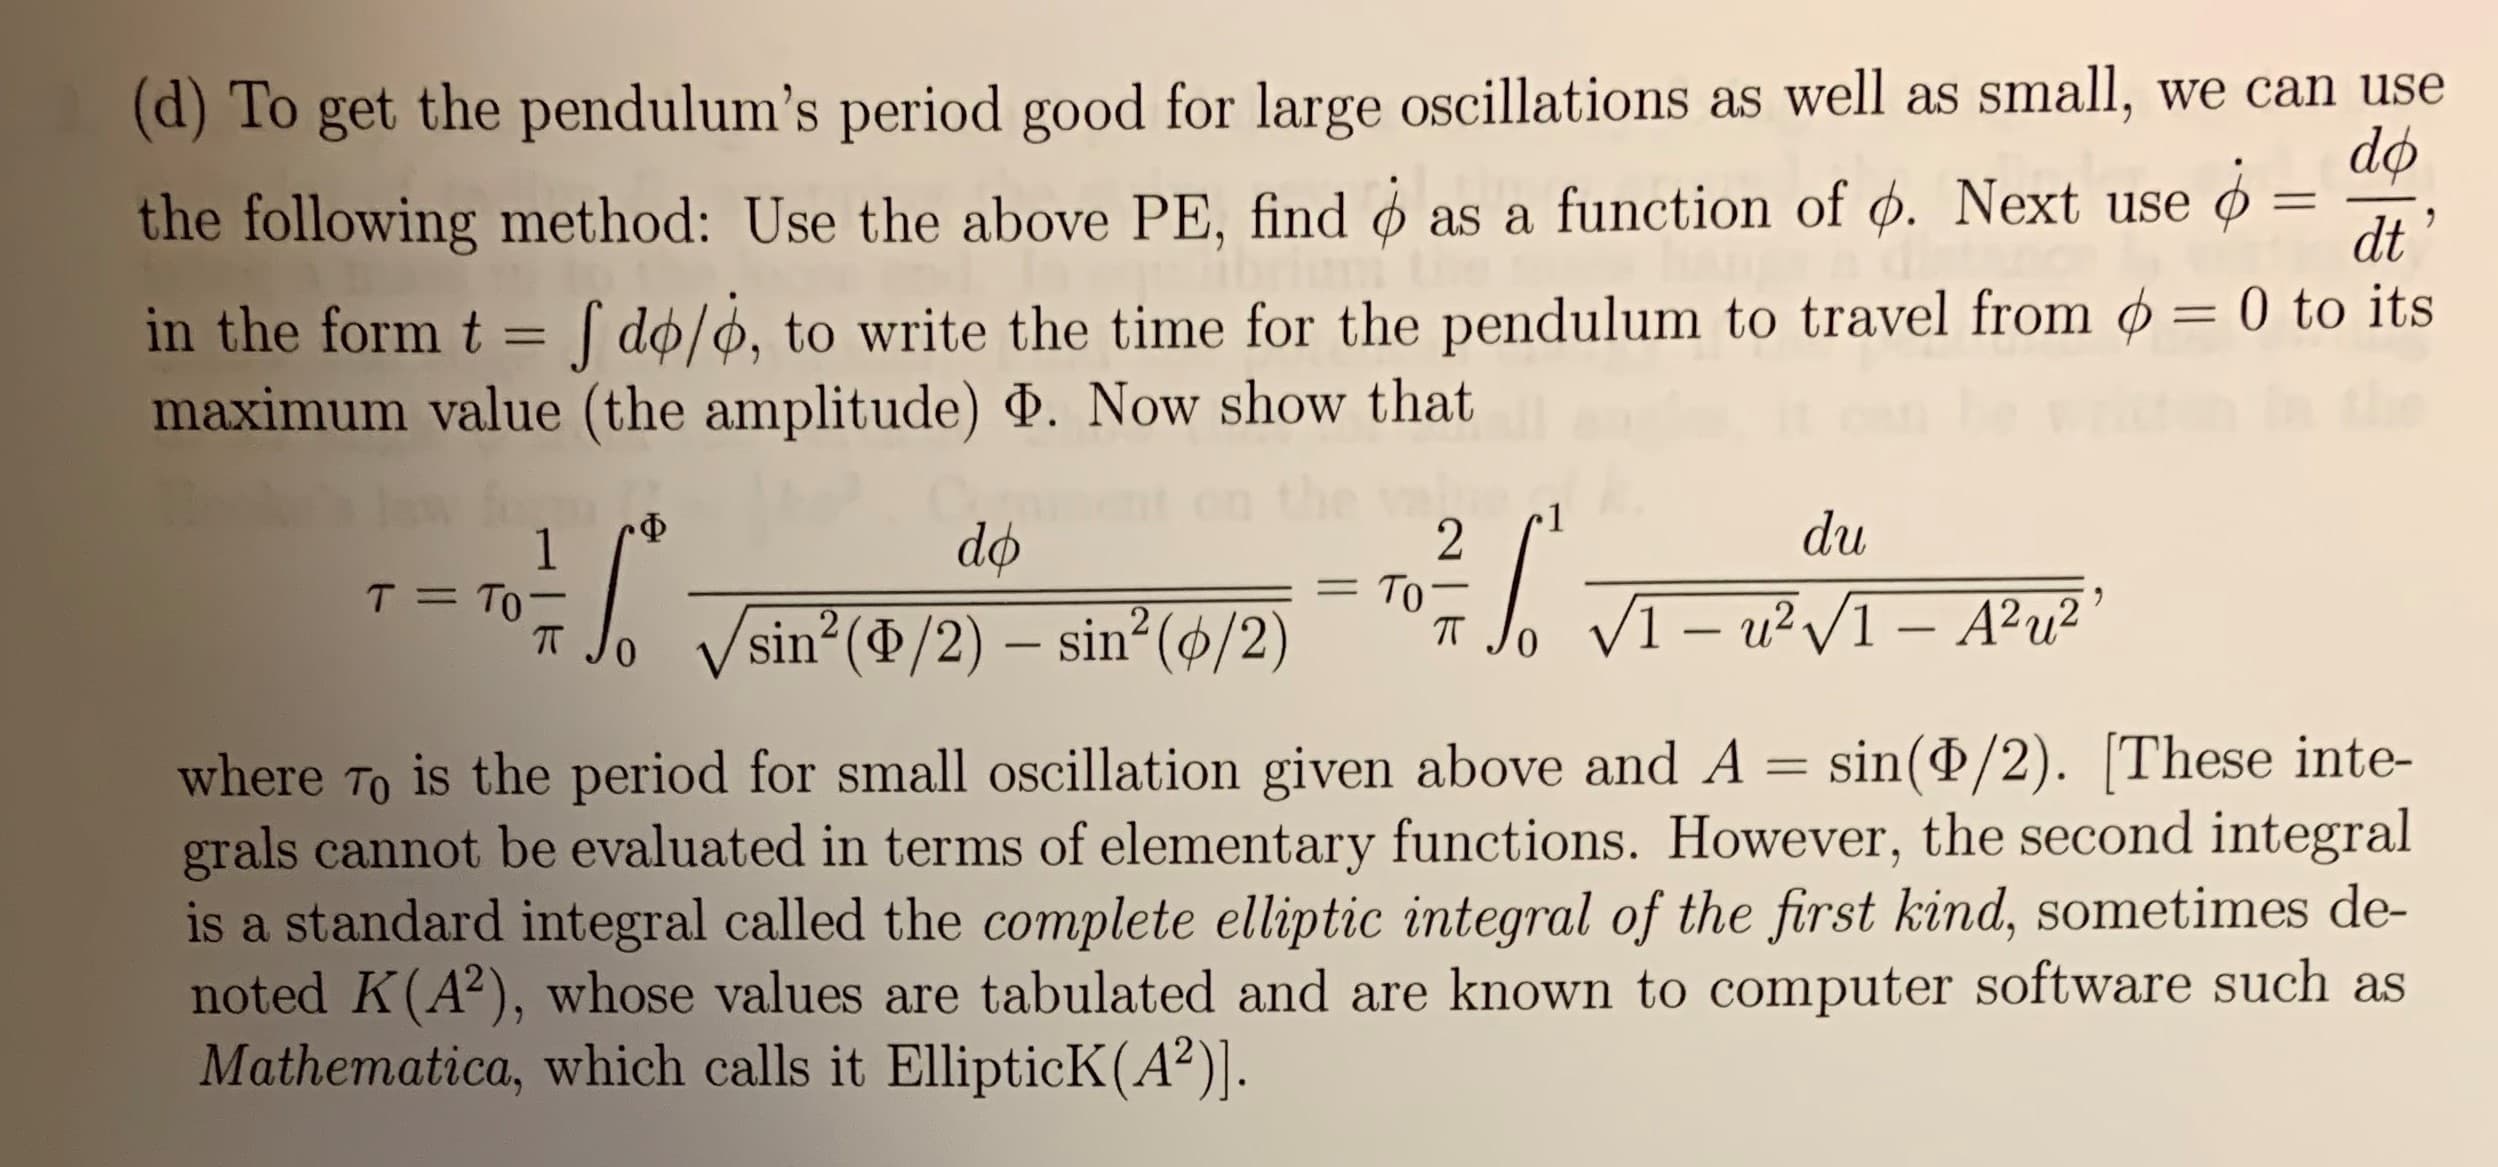 (d)To get the pendulum's period good for large oscillations as well as small,
the following method: Use the above PE, find
we can use
do
as a function of d. Next use
11
dt
in the form t
do/o, to write the time for the pendulum to travel from ø = 0 to its
maximum value (the amplitude) . Now show that
du
-Ф
do
2
То -
T TO
1
VI-u2I-A2u2
sin (d/2) sin2 (ø/2)
0
is the period for small oscillation given above and A = sin(P/2). These inte-
where To
grals cannot be evaluated in terms of elementary functions. However, the second integral
is a standard integral called the complete elliptic integral of the first kind, sometimes de-
noted K(A2), whose values are tabulated and are known to computer software such as
Mathematica, which calls it EllipticK (A2)].
